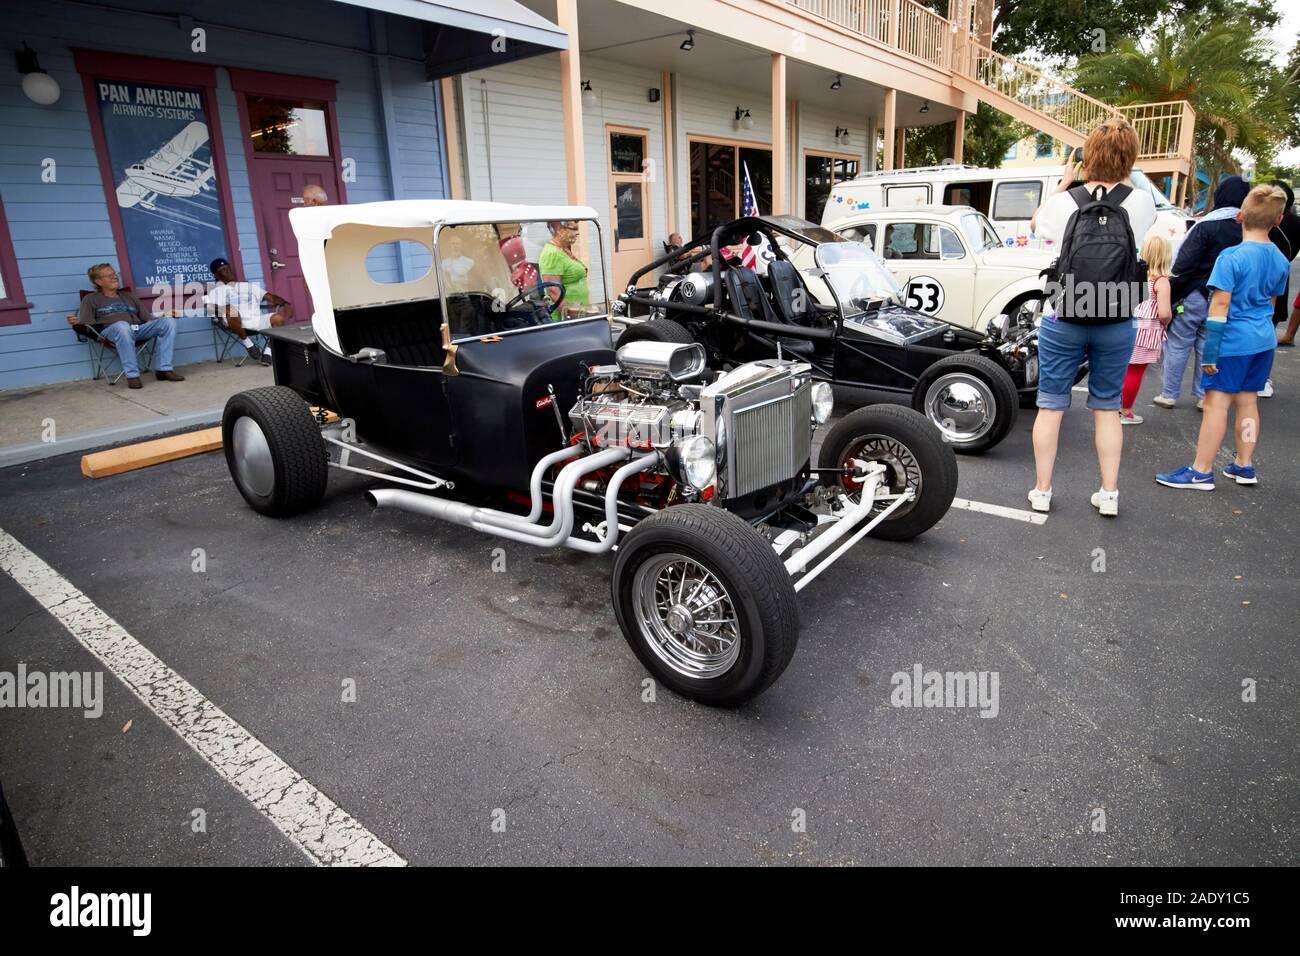 classic hot rod on display during car show in old town kissimmee florida usa Stock Photo